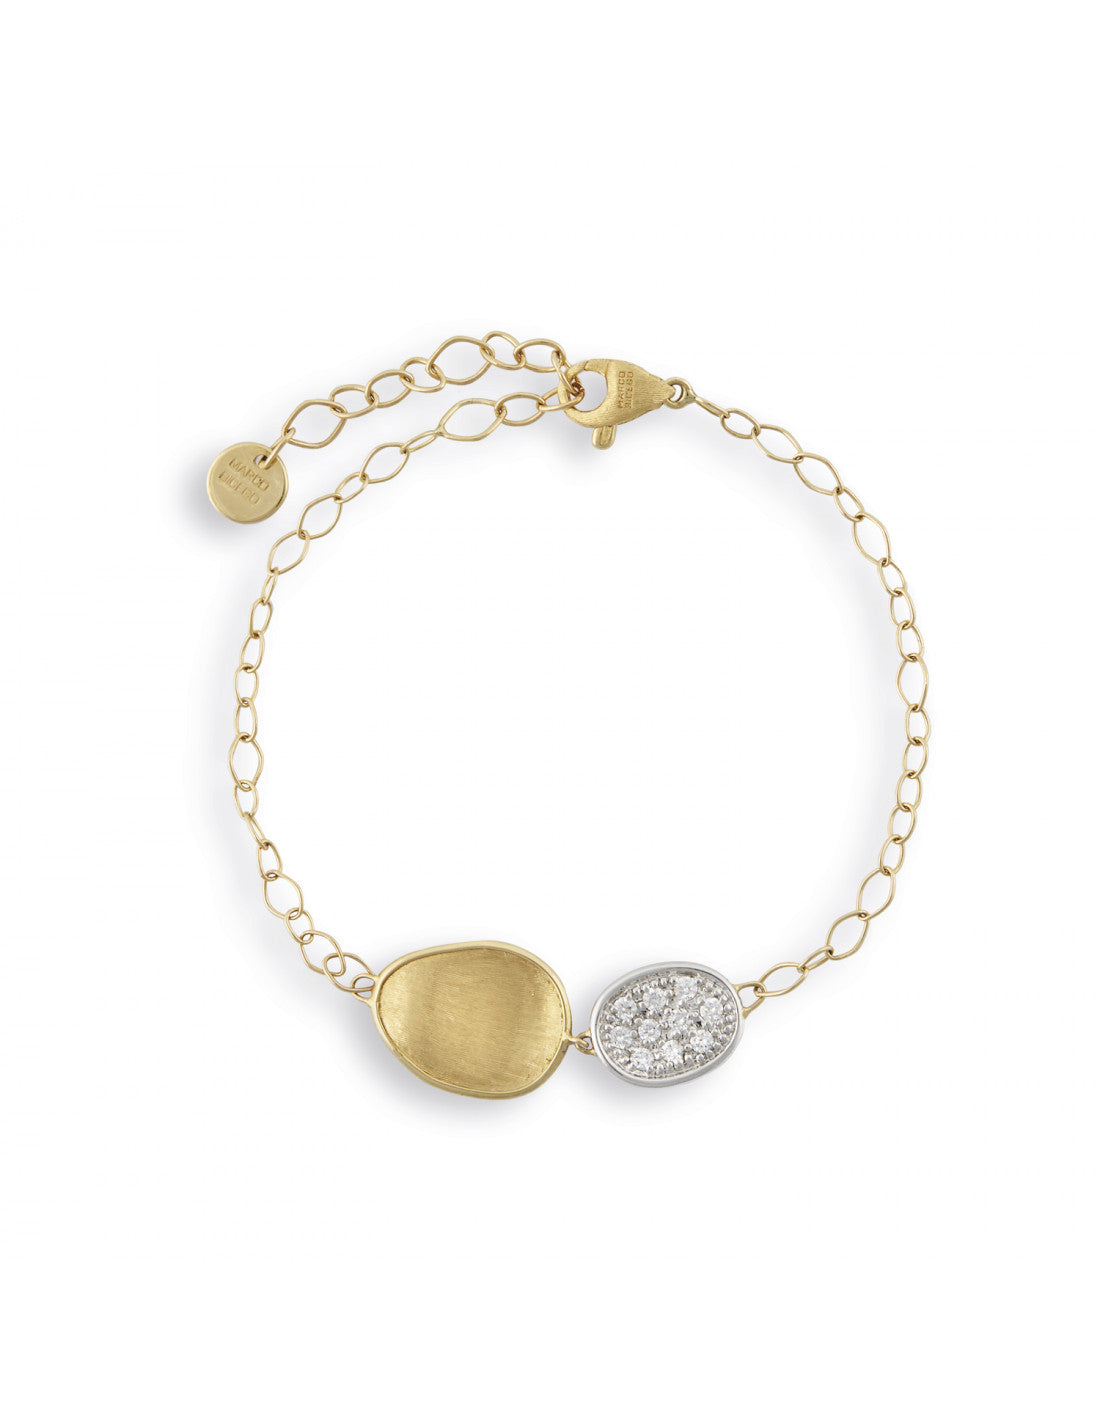 Lunaria Bracelet in 18 Yellow Gold with Pave Diamonds - Orsini Jewellers